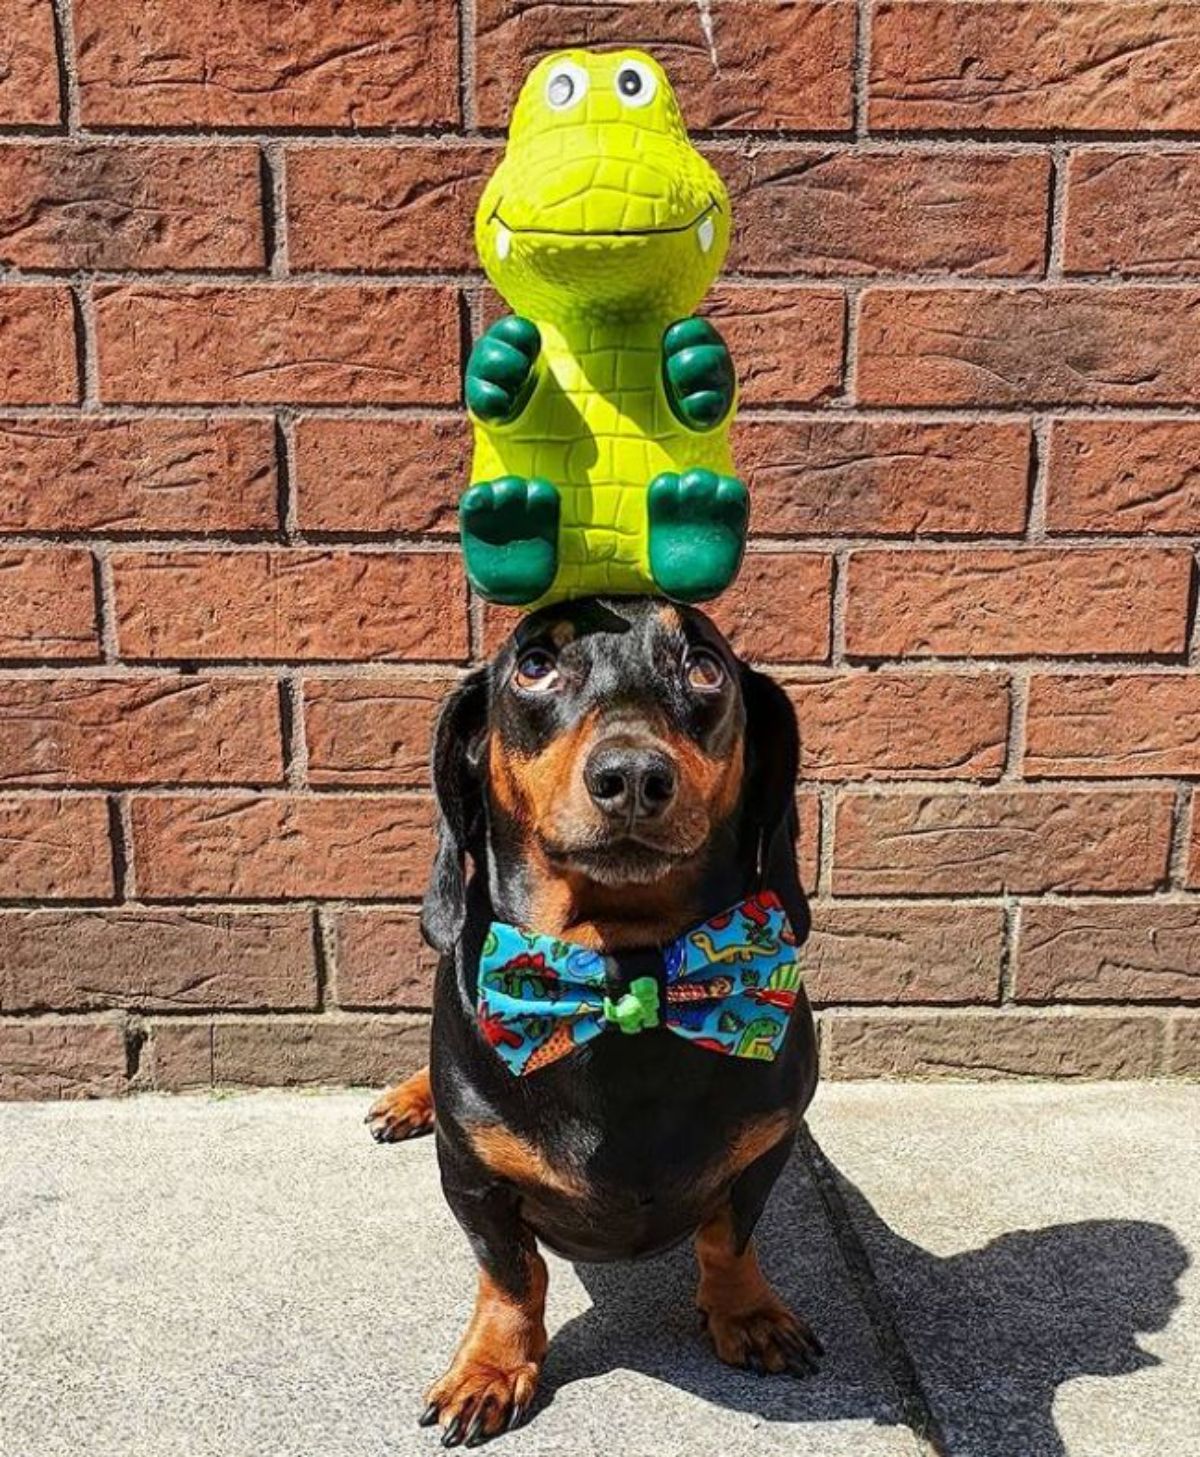 black and brown dachshund with a green toy alligator on the head and the dog is earing a colourful animal themed bowtie